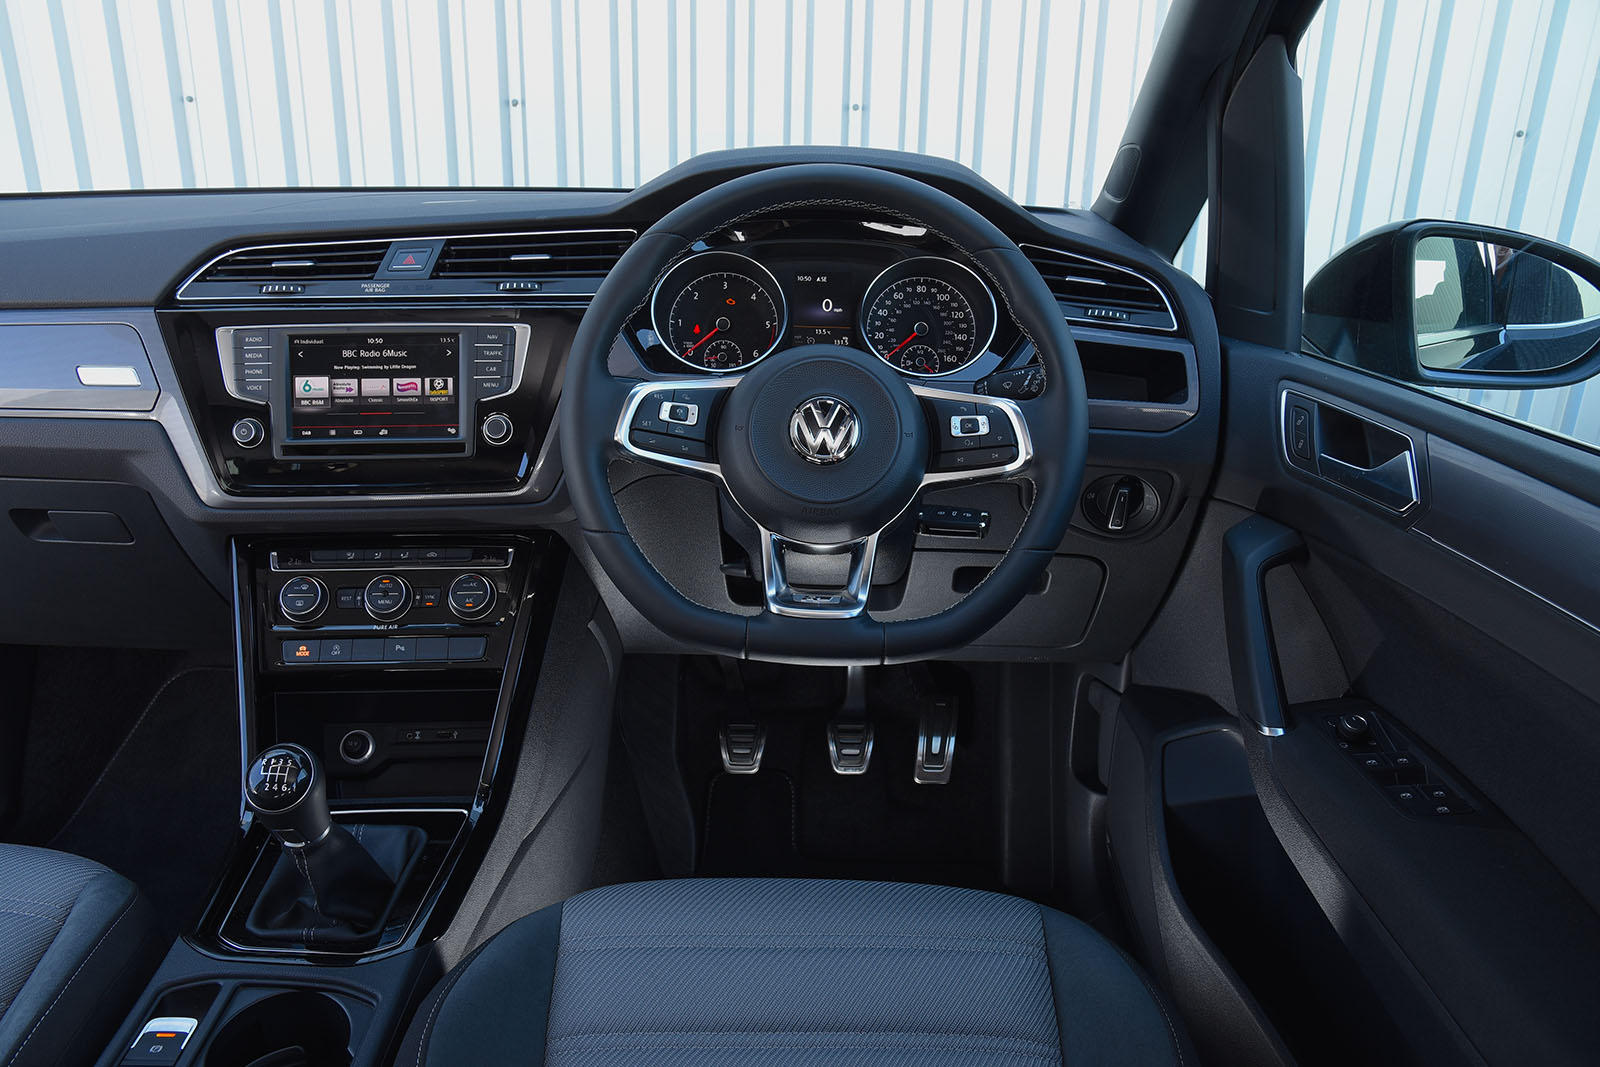 Nearly new buying guide: Volkswagen Touran